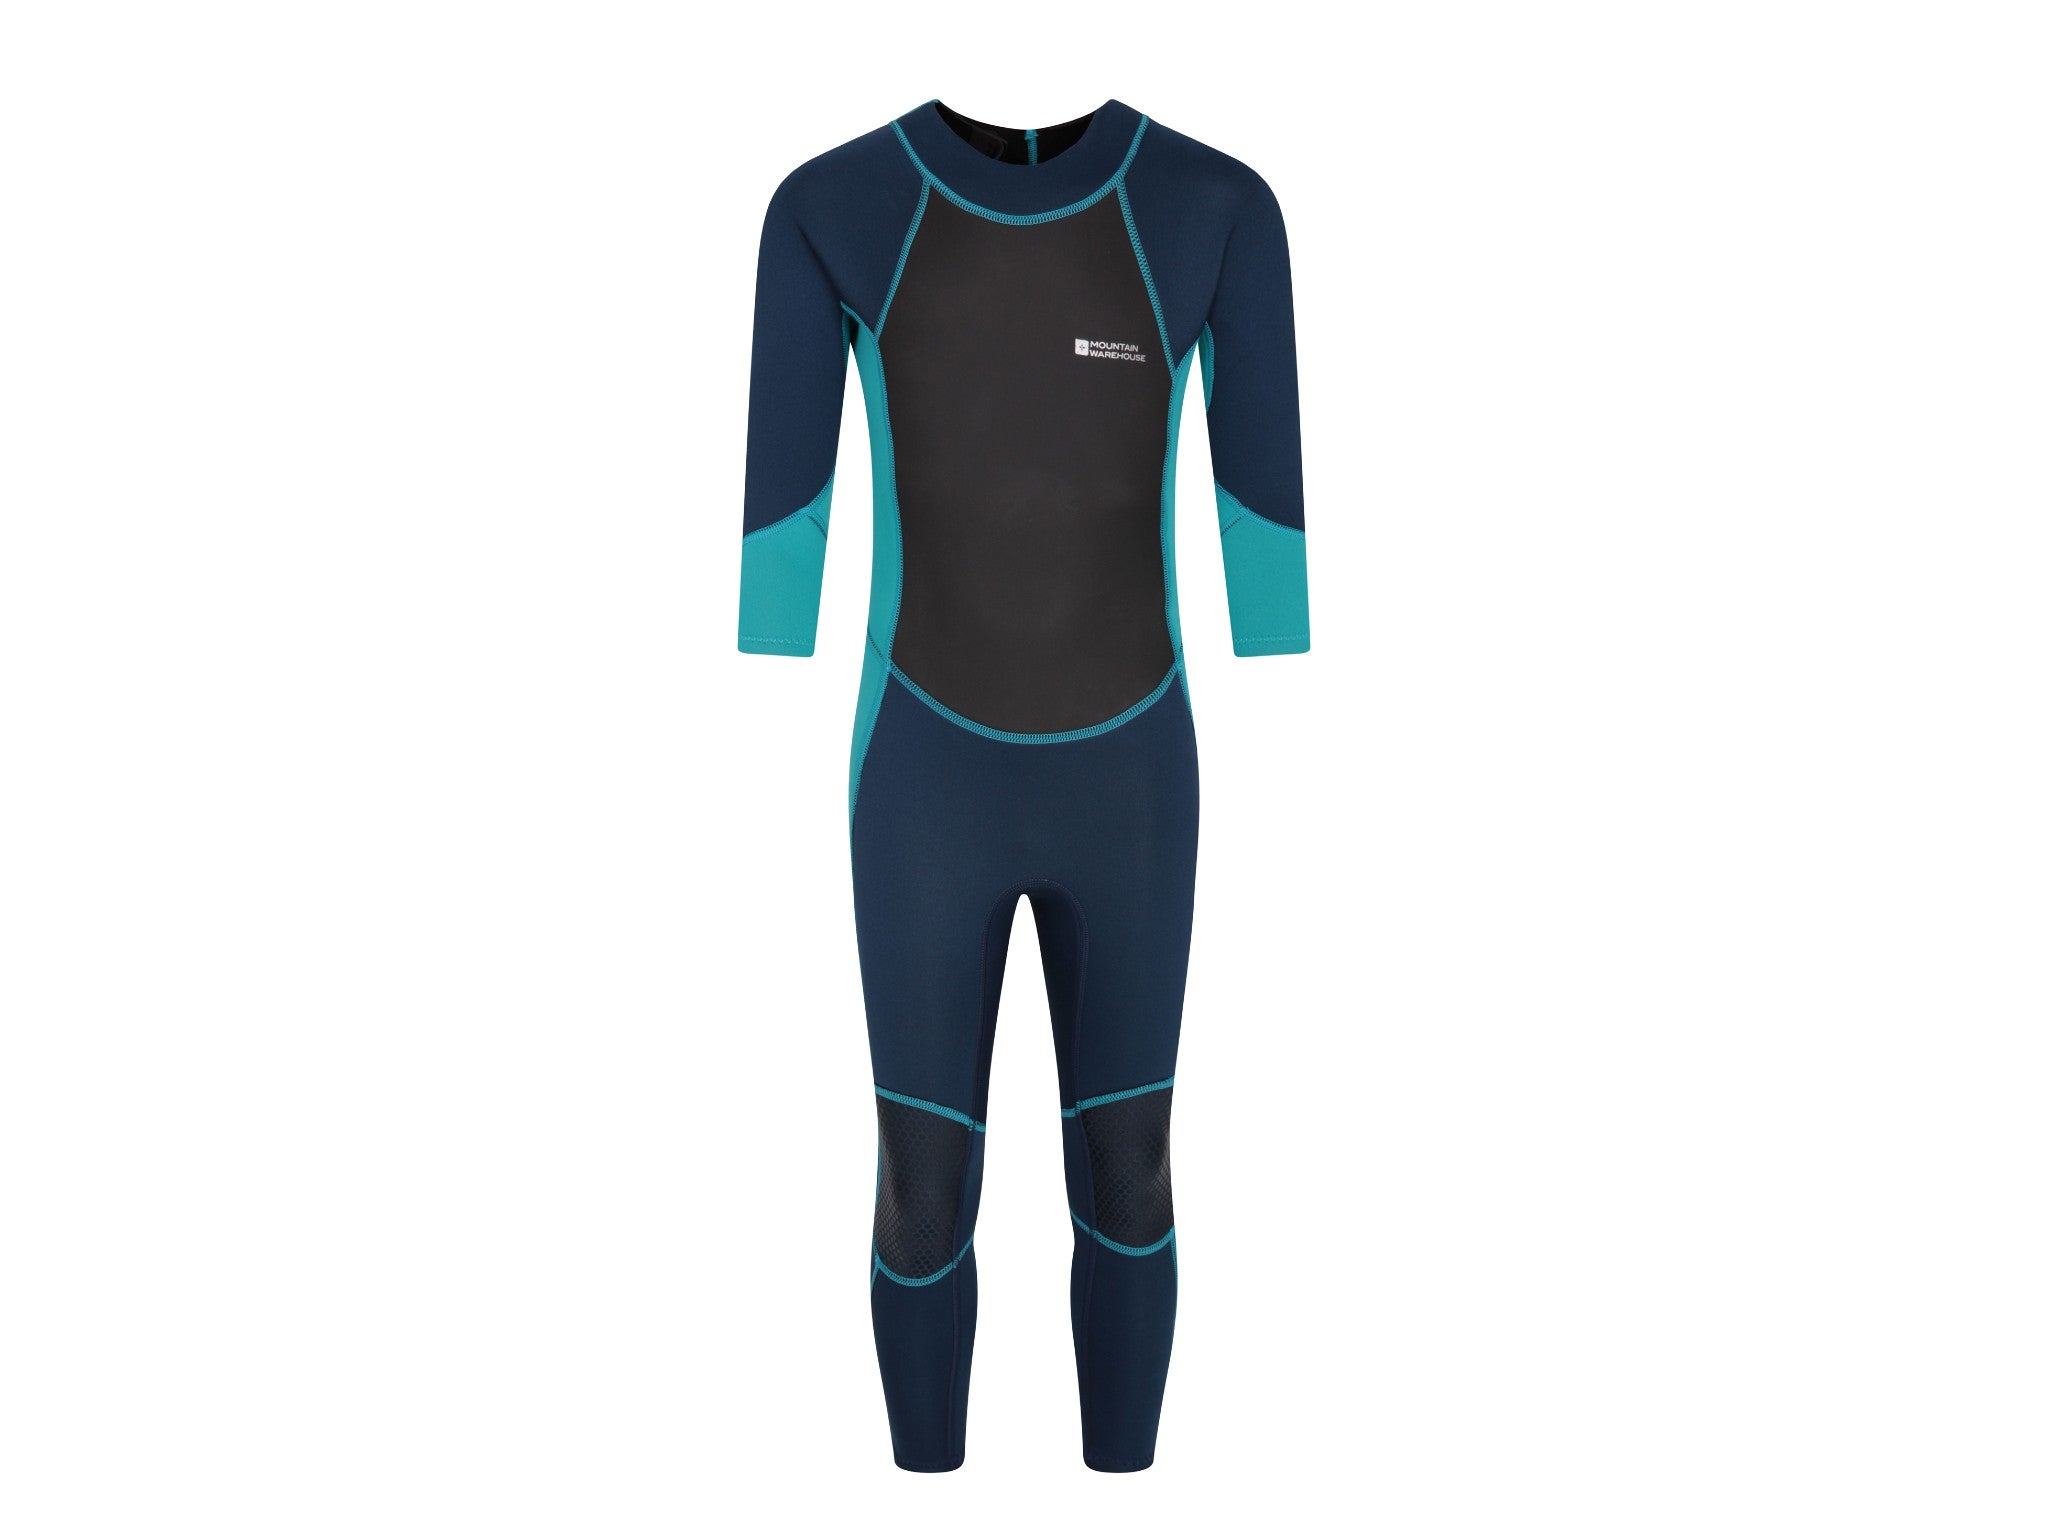 UPF50+ Sun Protection Mountain Warehouse Kids Full Wetsuit Flat Seams & Easy Glide Zip Swimming Wetsuit Ideal for Kayaking Diving Neoprene Childrens Wetsuit 